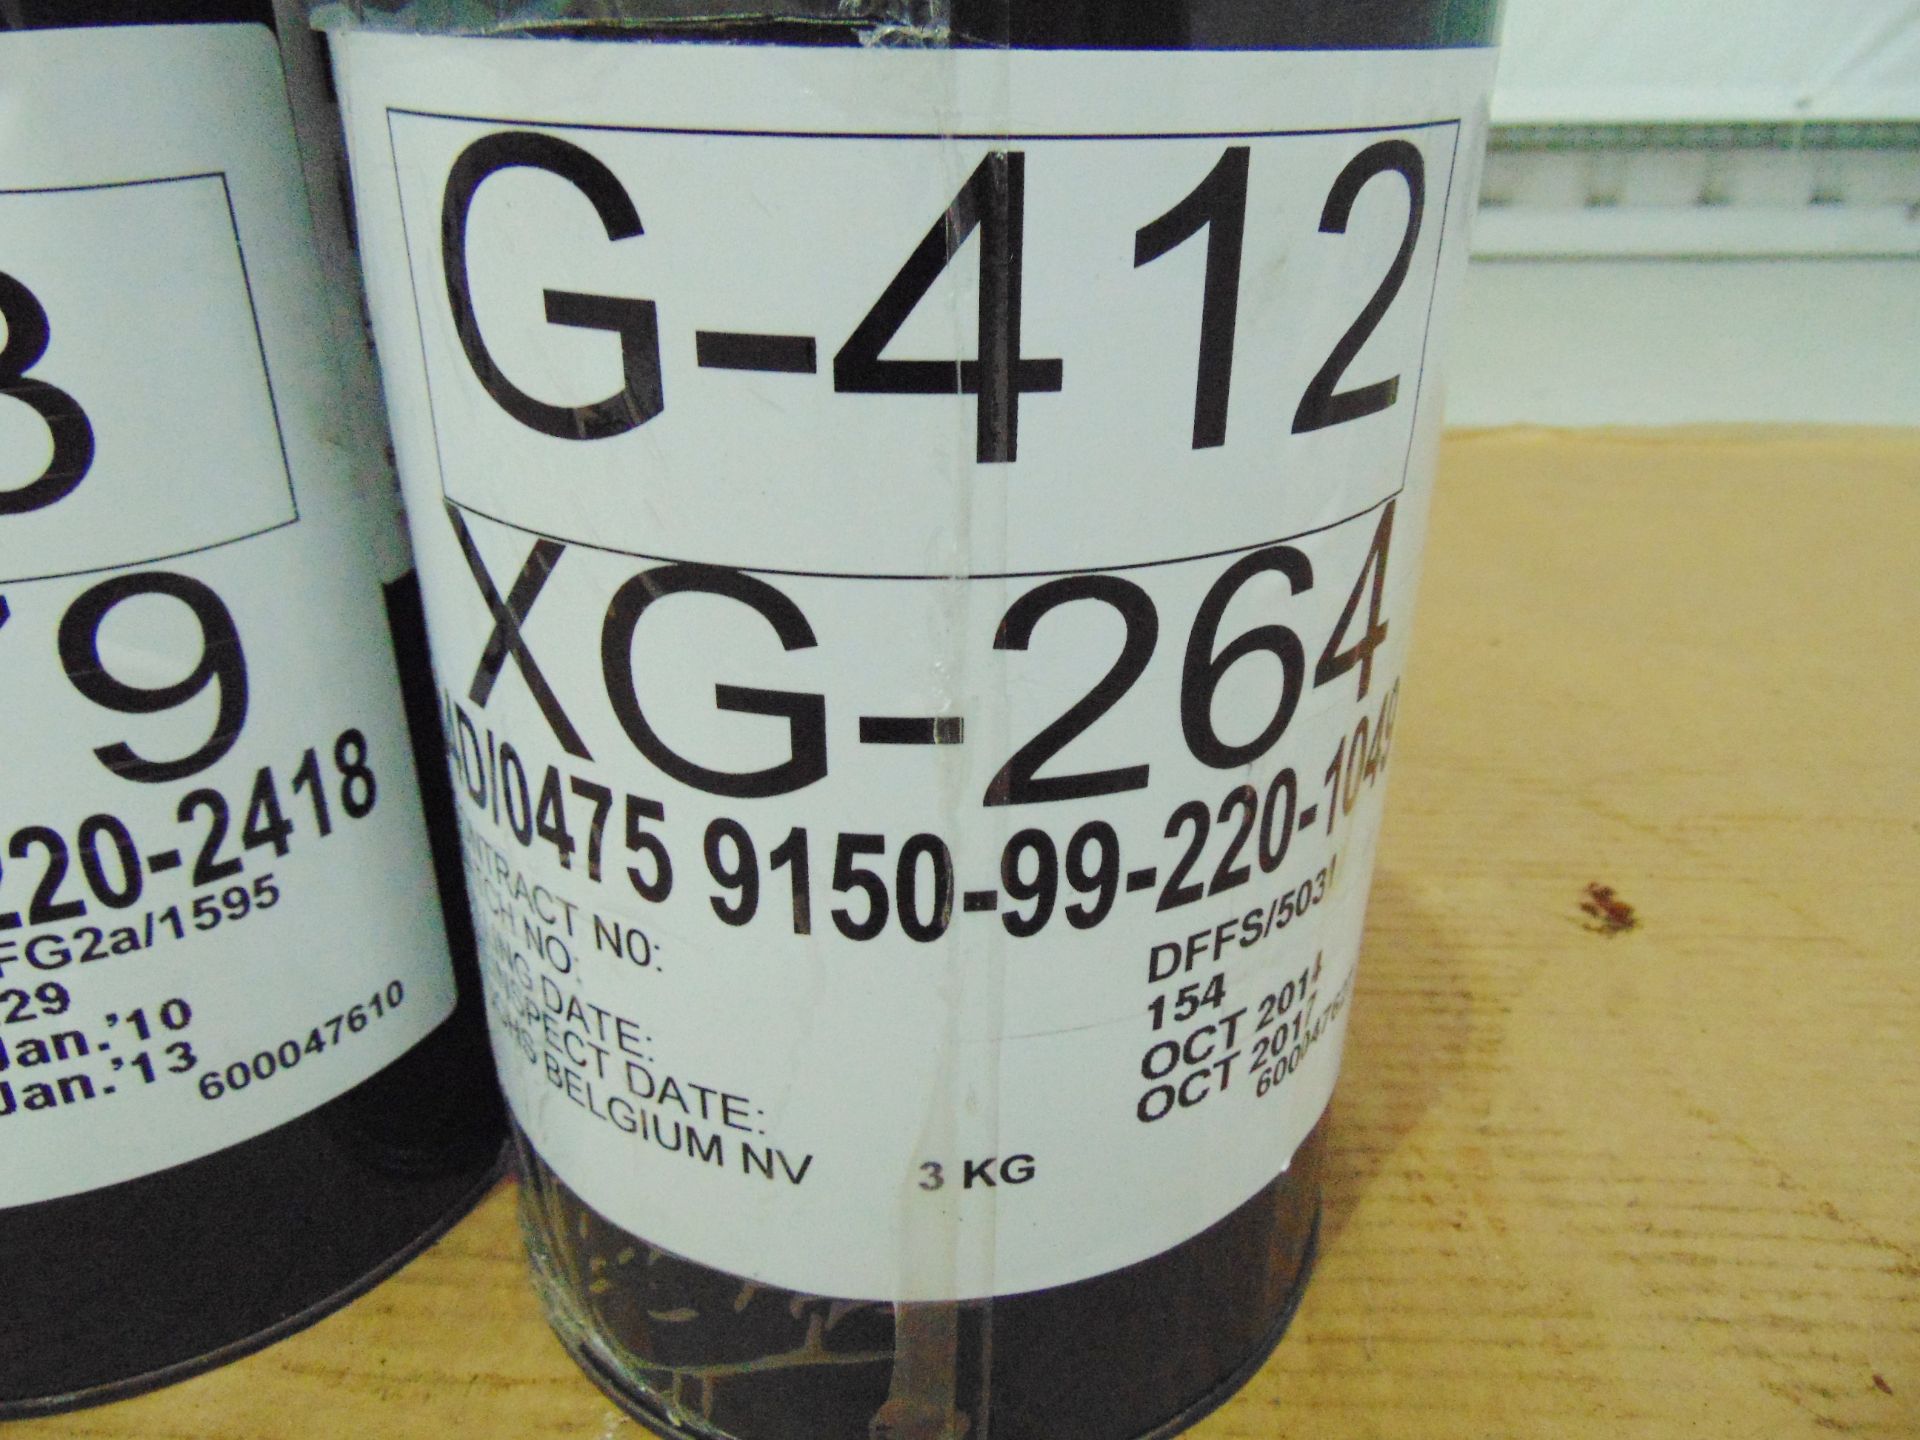 1 x Unissued 3Kg Tin of XG-279 Grease & 1 x 3Kg Tin of XG-264 Graphite Grease - Image 2 of 3